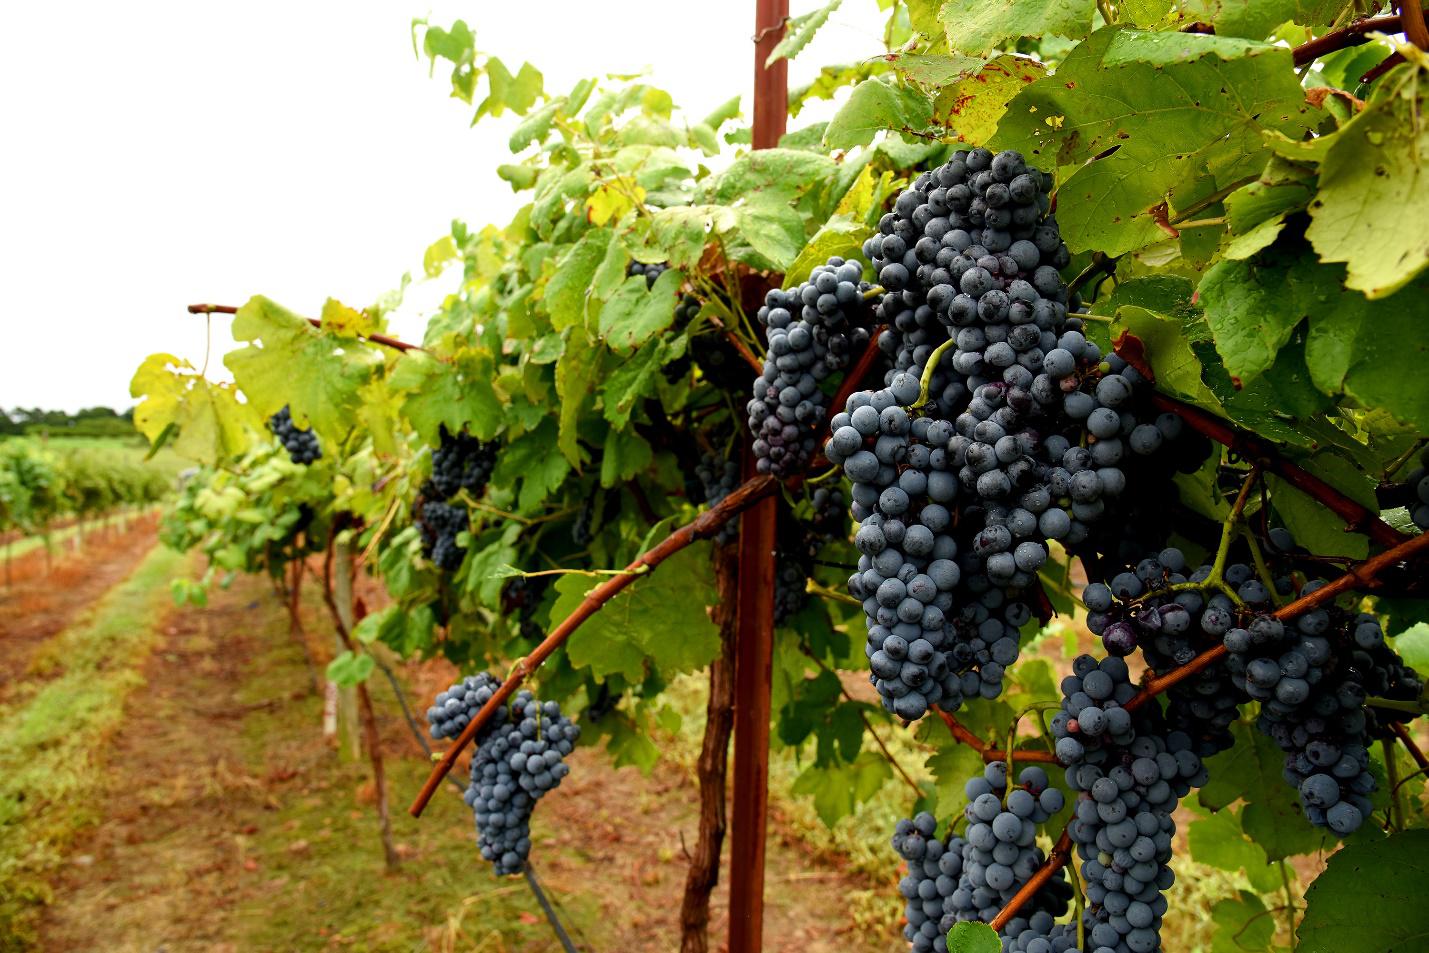 Clusters of purple grapes hanging off a row of grape vines in a field